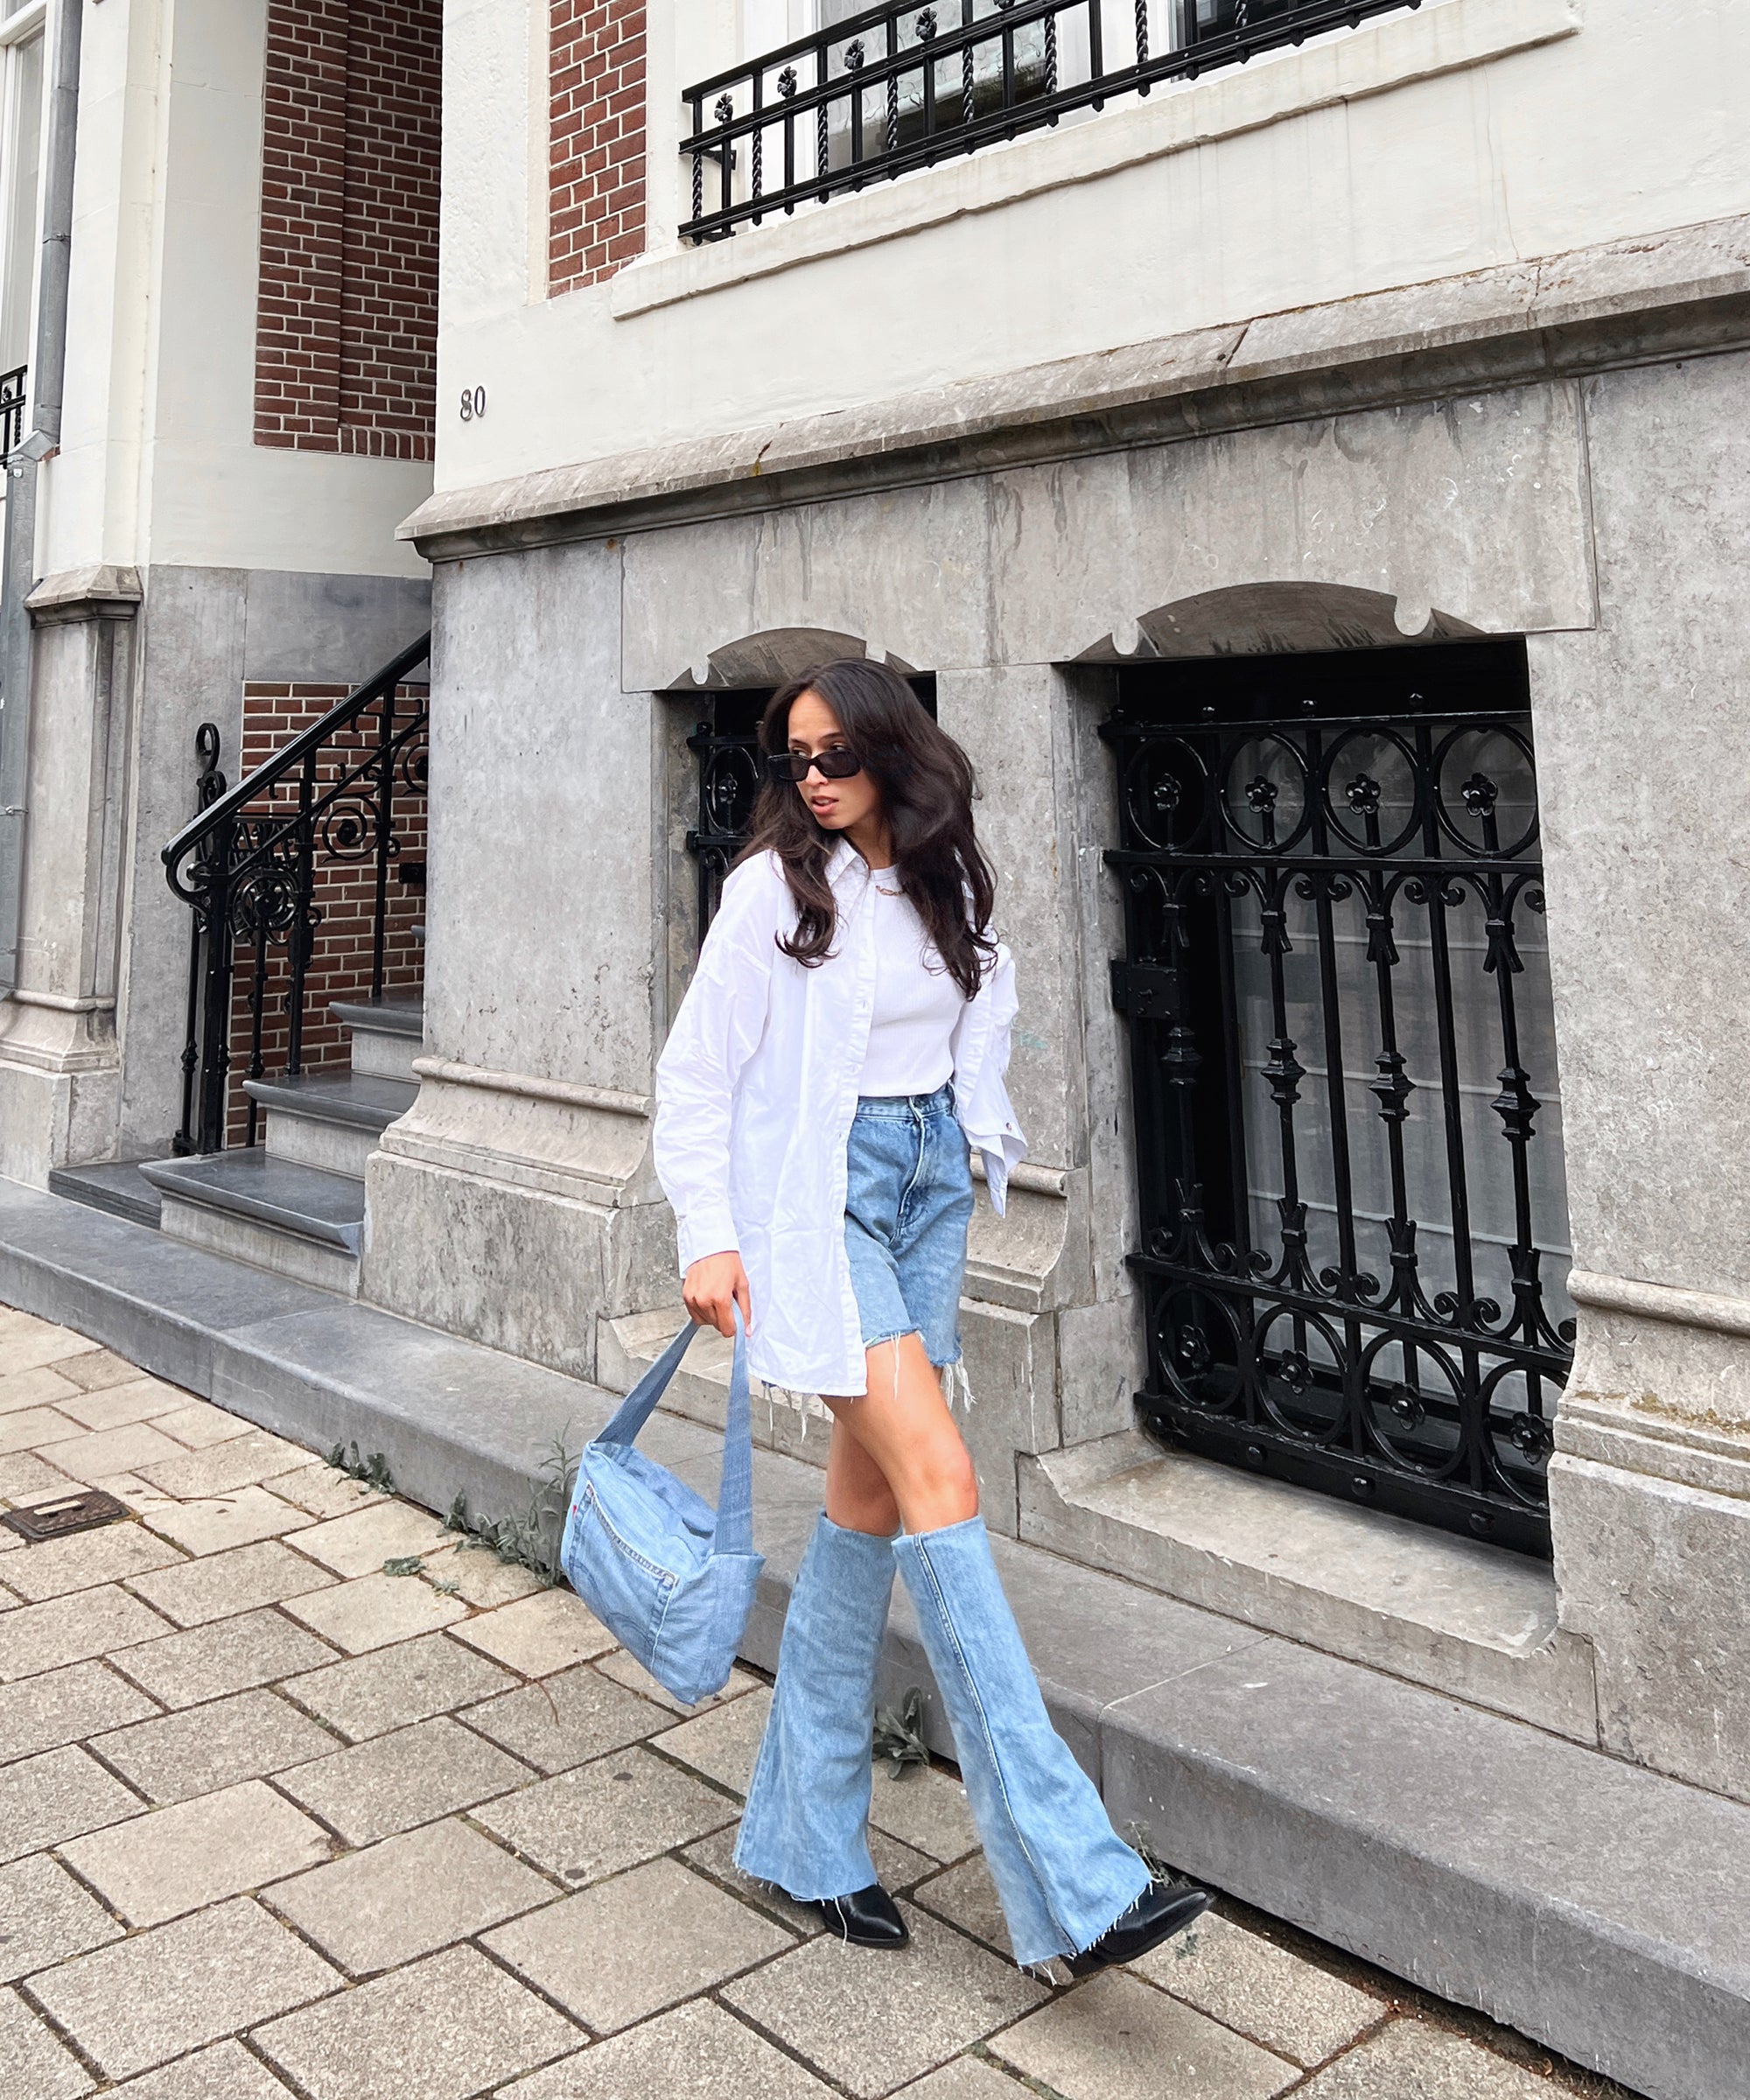 Denim Leg Warmers: How To Upcycle Jeans The 2022 Way